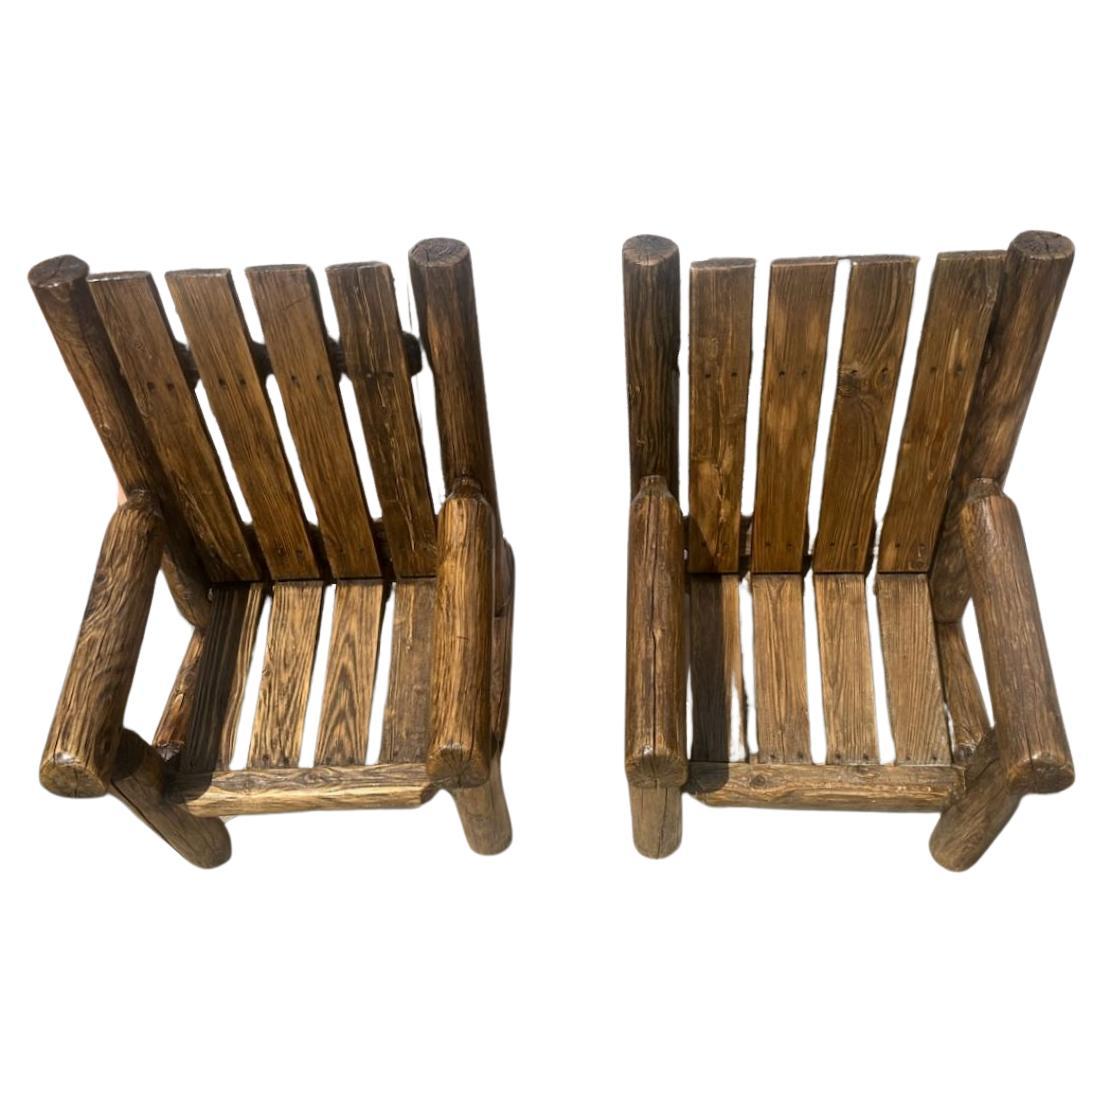 Adrondach Children's Ranch House or Beach Chairs For Sale